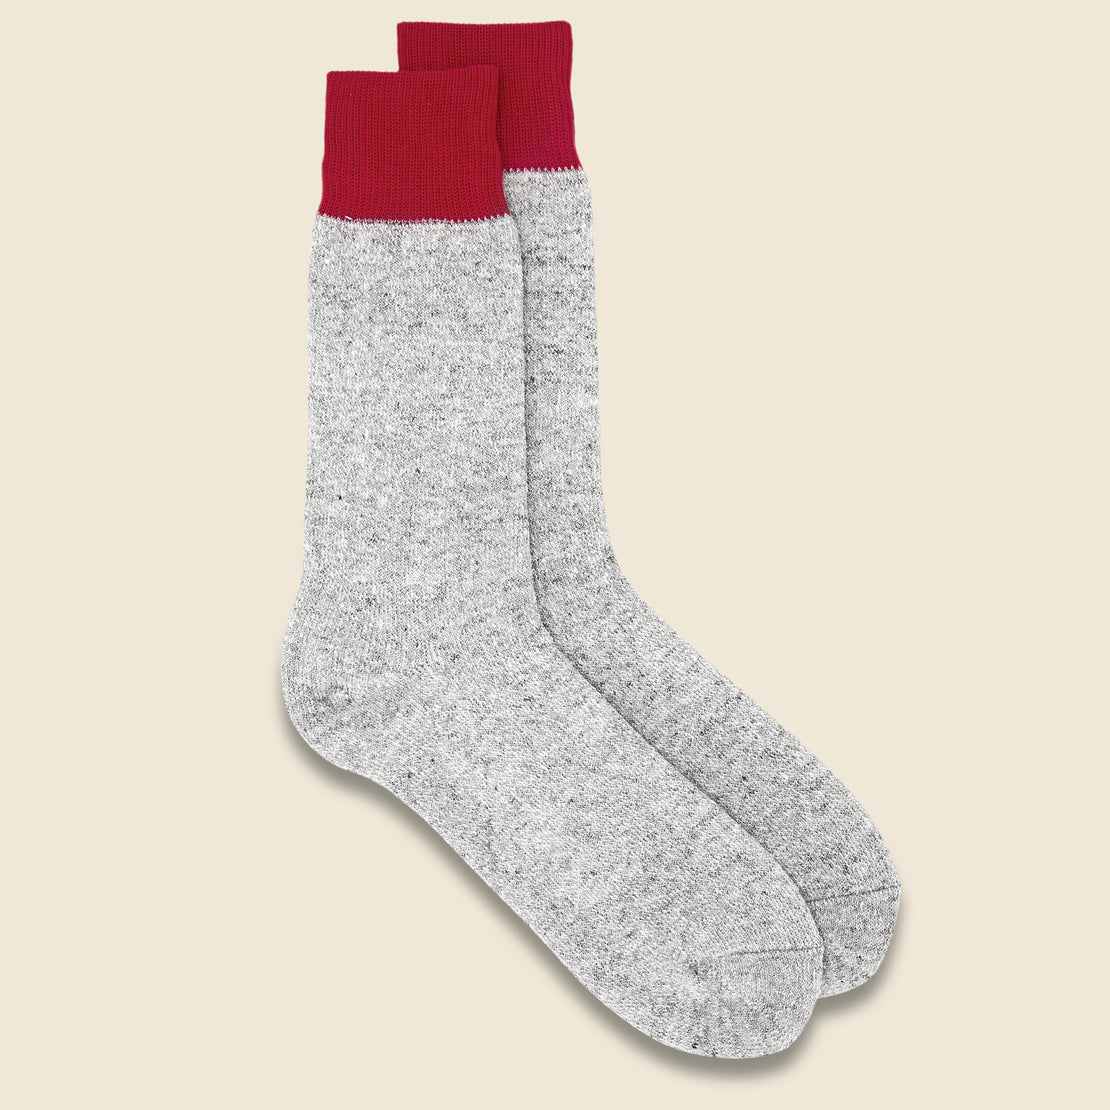 RoToTo Silk & Cotton Double Face Sock - Red/Light Grey